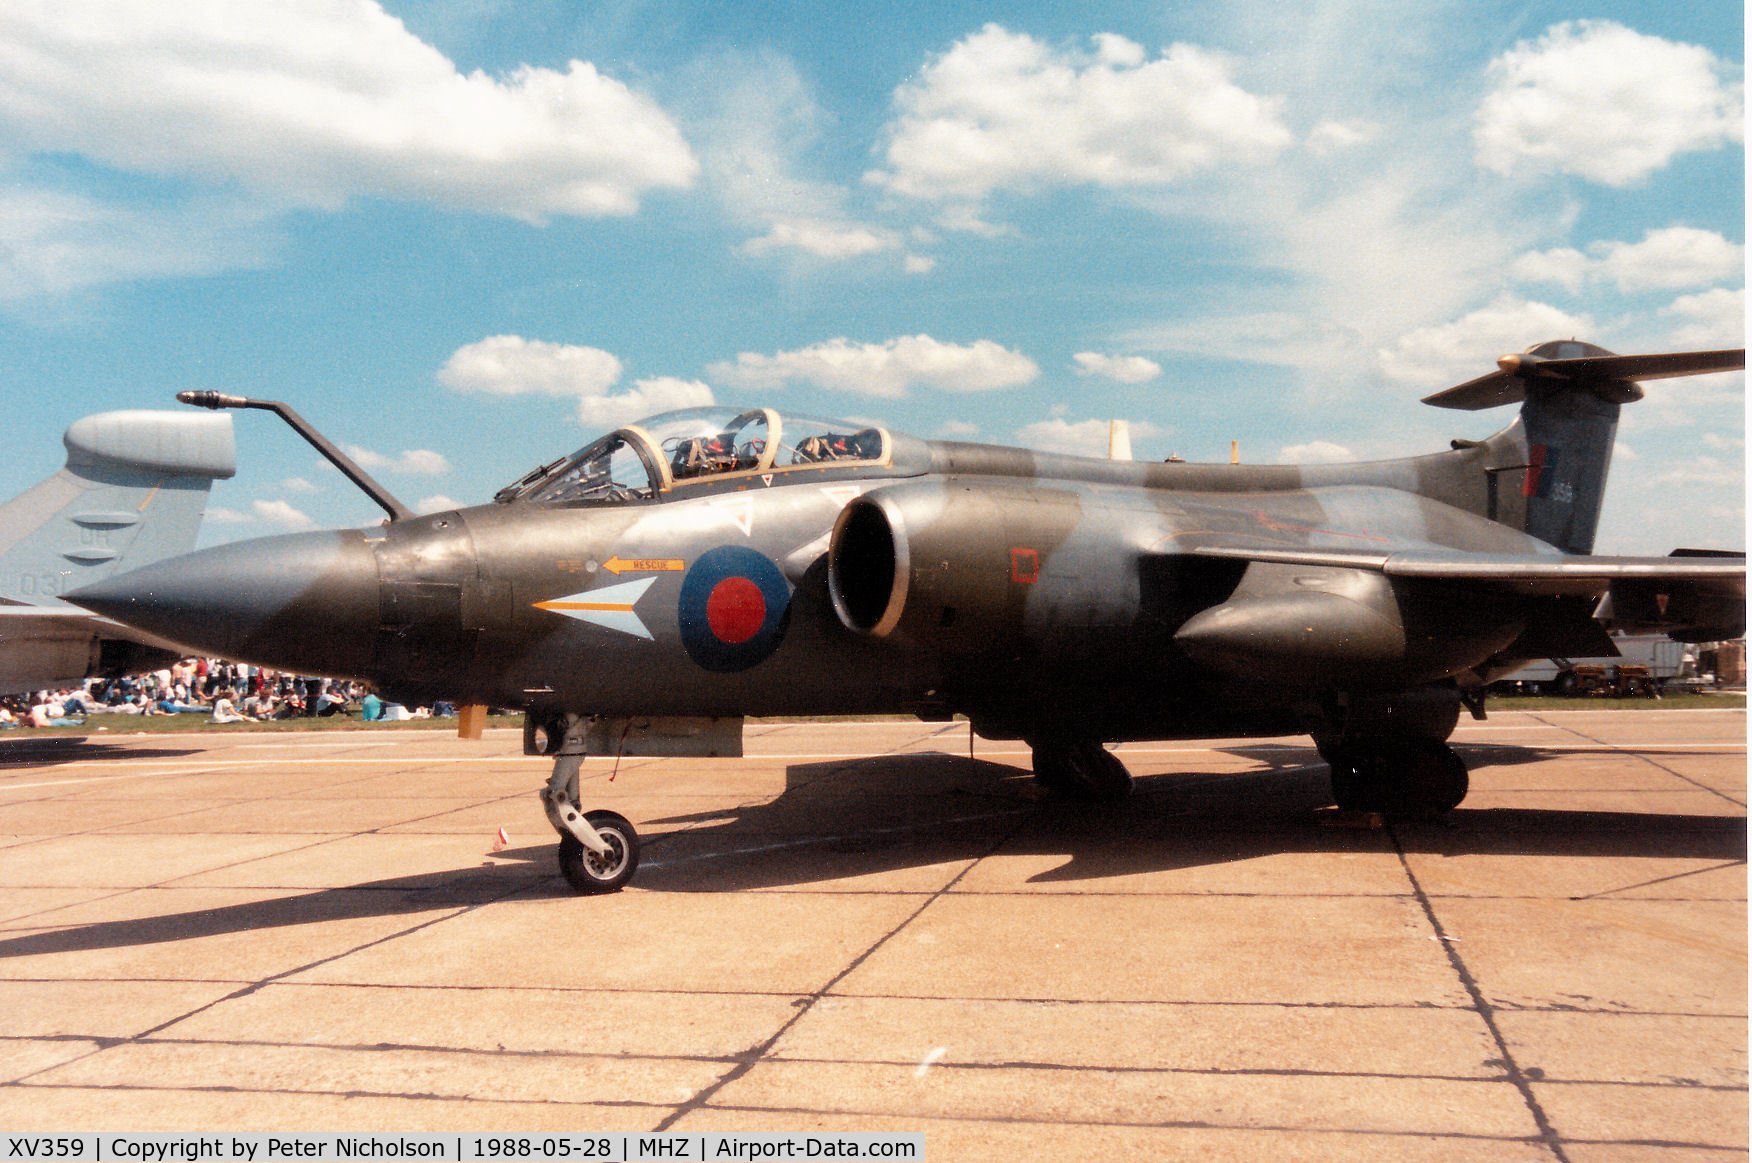 XV359, 1968 Hawker Siddeley Buccaneer S.2B C/N B3-09-67, Buccaneer S.2B of 208 Squadron at RAF Lossiemouth on display at the 1988 RAF Mildenhall Air Fete.